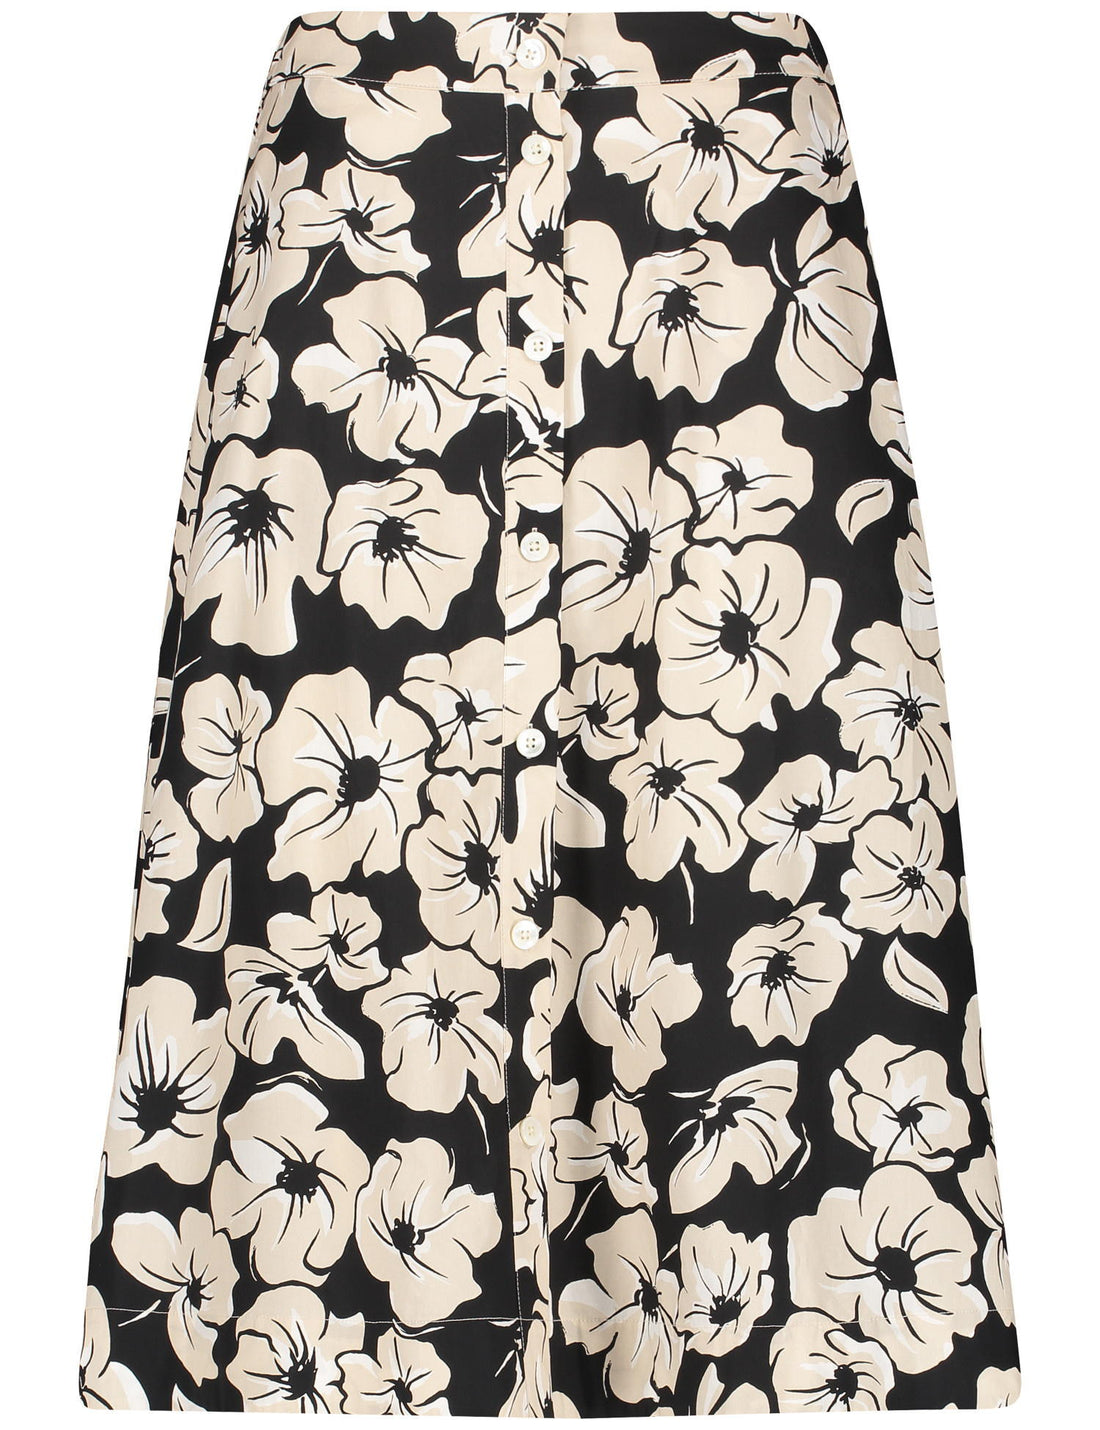 Midi Skirt With A Floral Pattern_310015-31511_1098_02